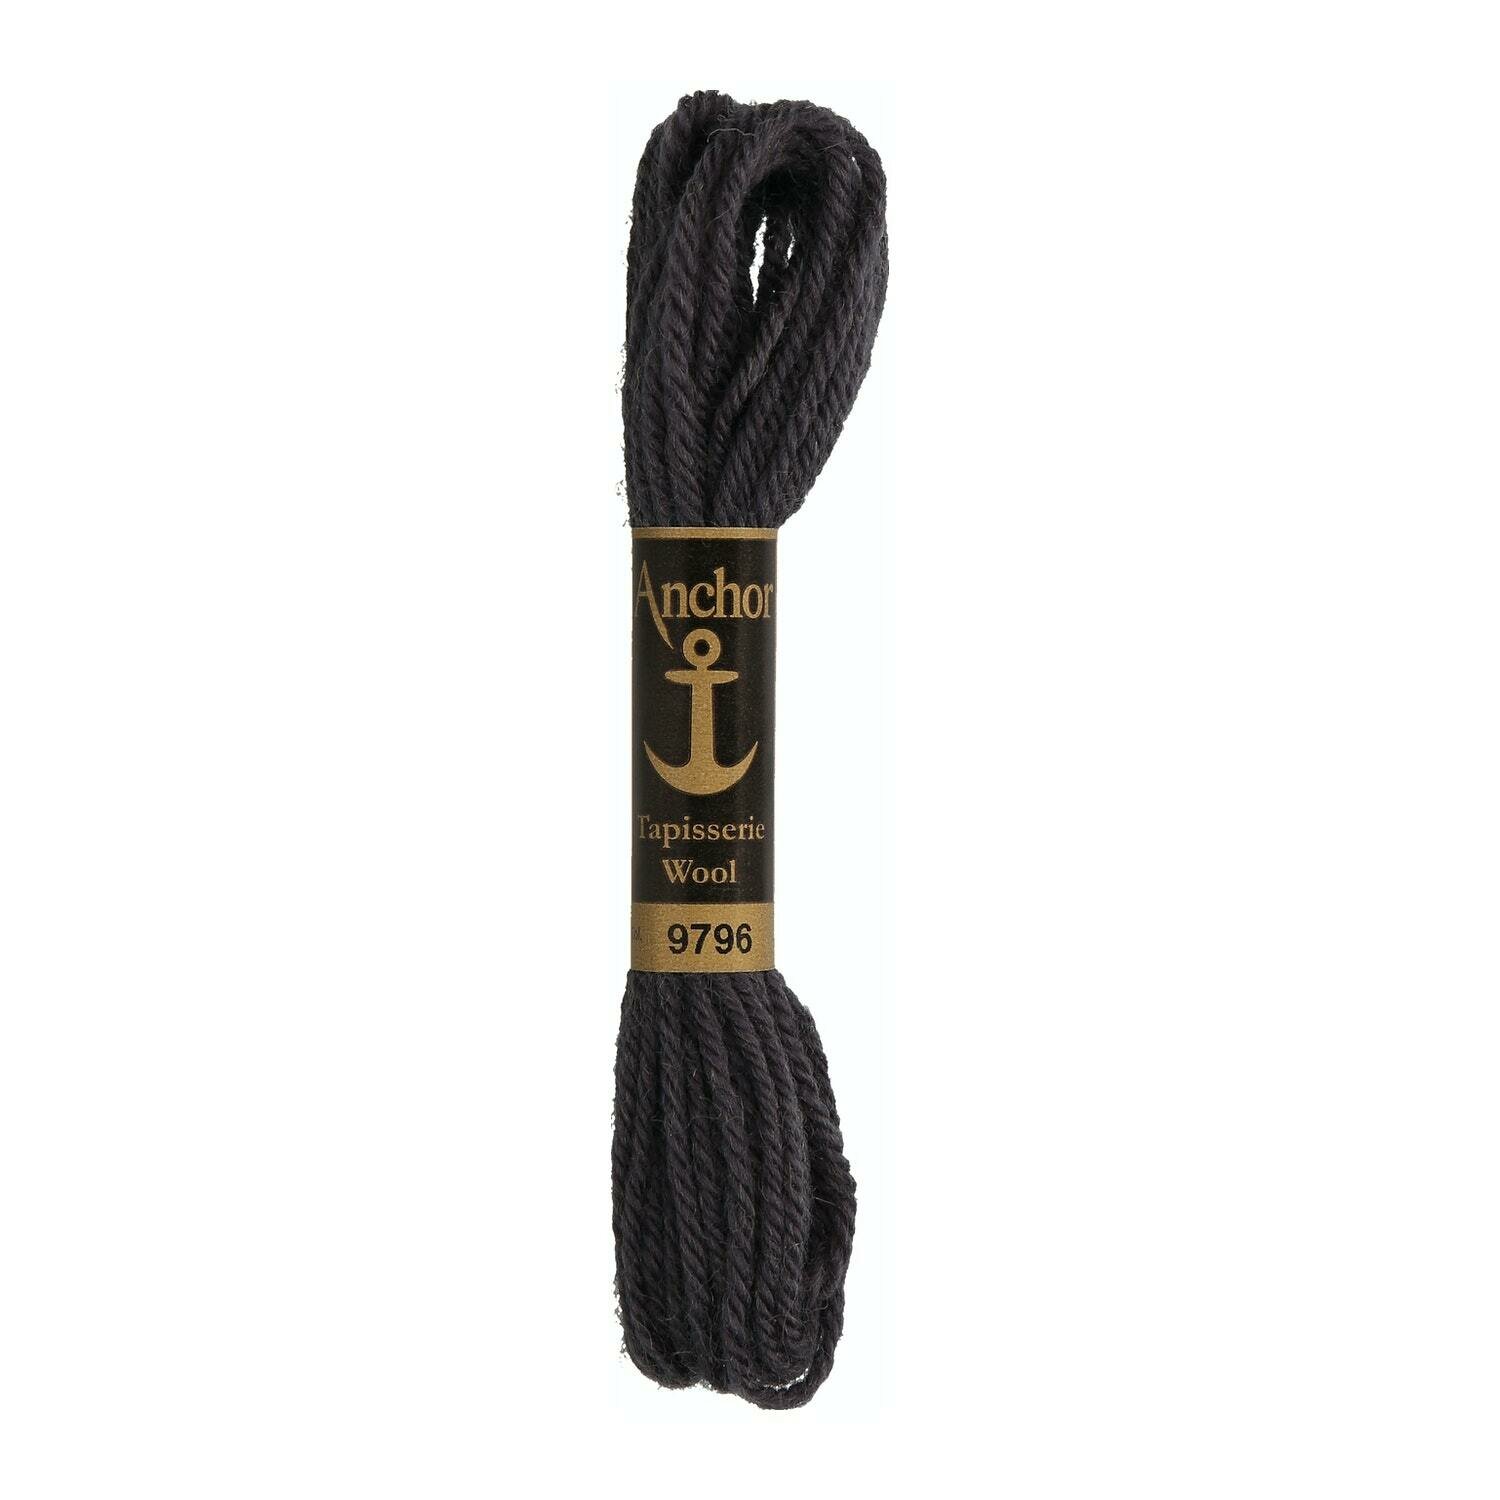 Anchor Tapisserie Wool # 09796